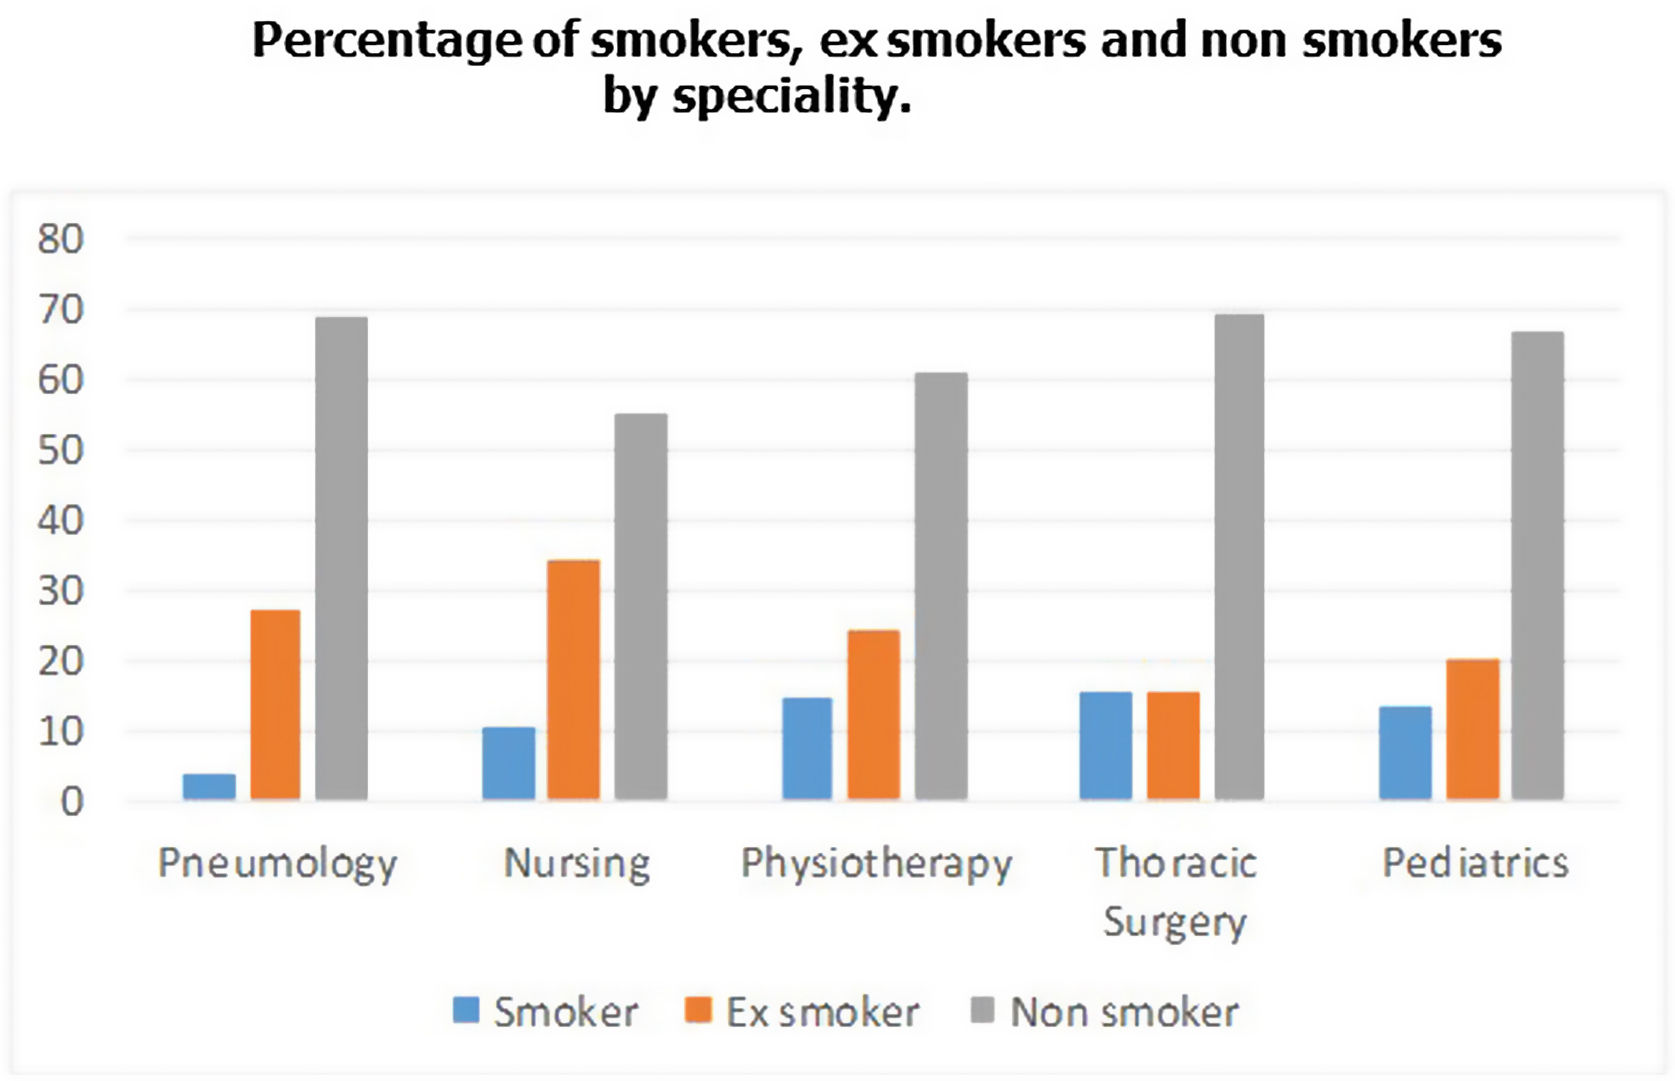 Waterpipe smoking: a review of pulmonary and health effects